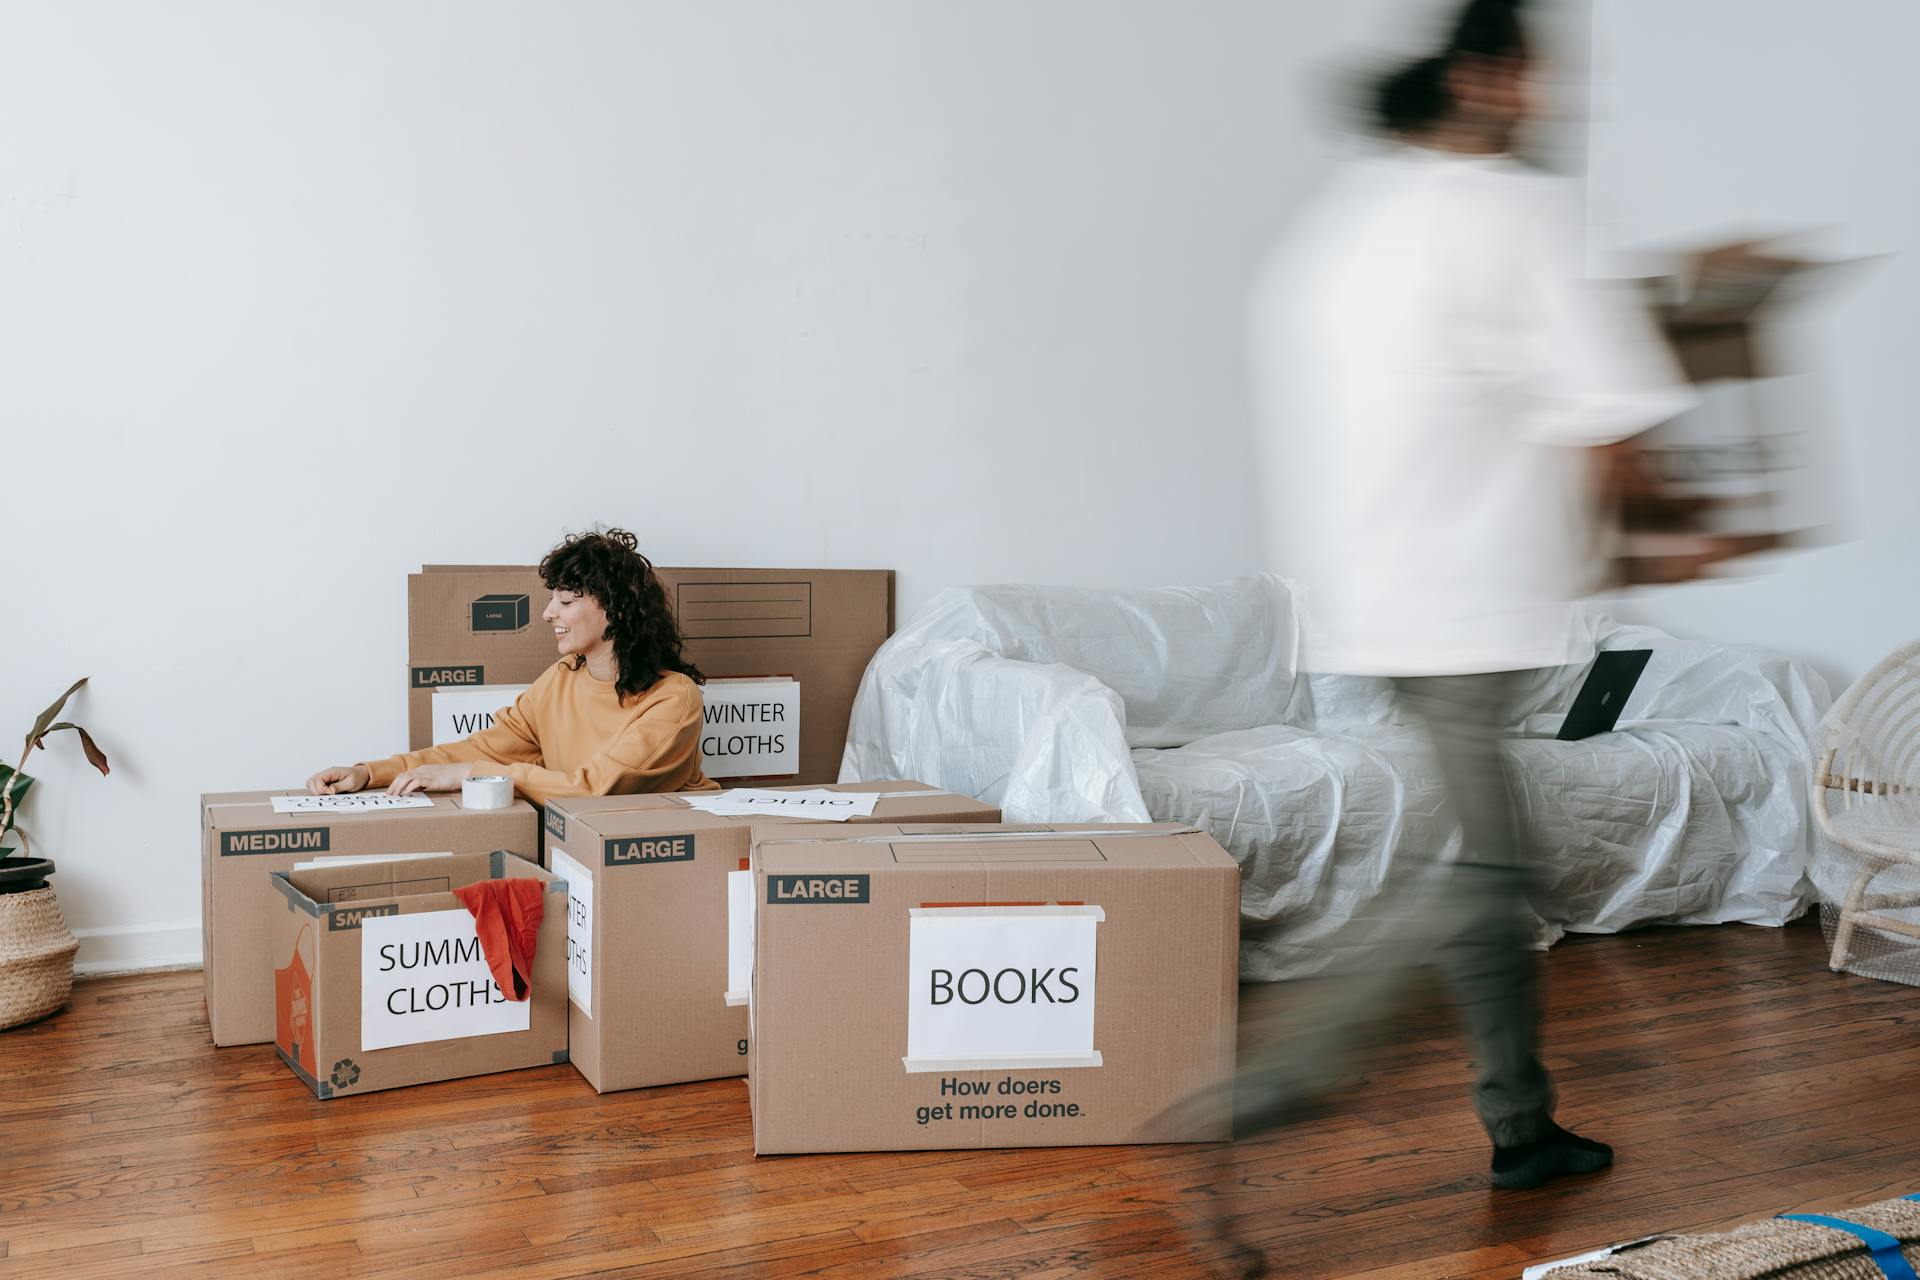 A couple with packing boxes | Source: Pexels